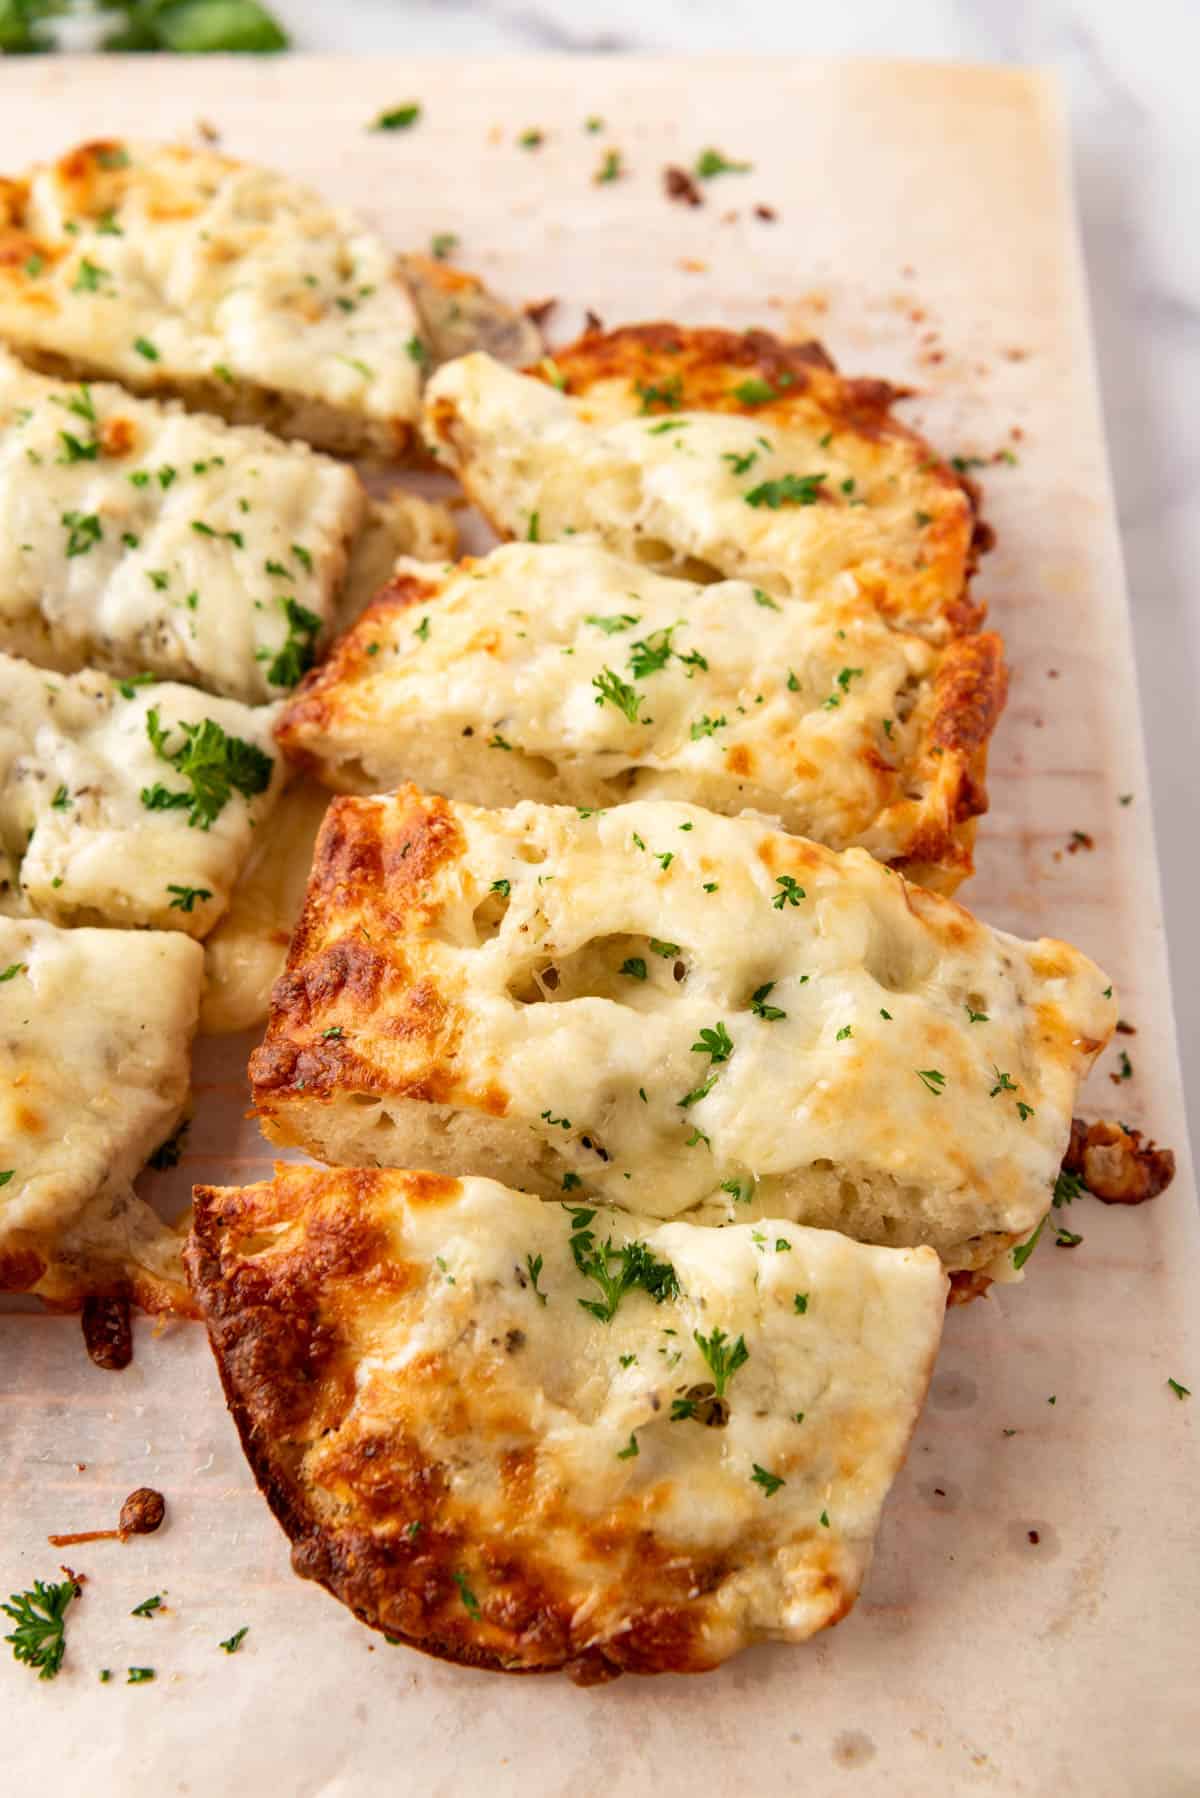 Slices of garlic bread with melted mozzarella cheese sprinkled with chopped parsley.